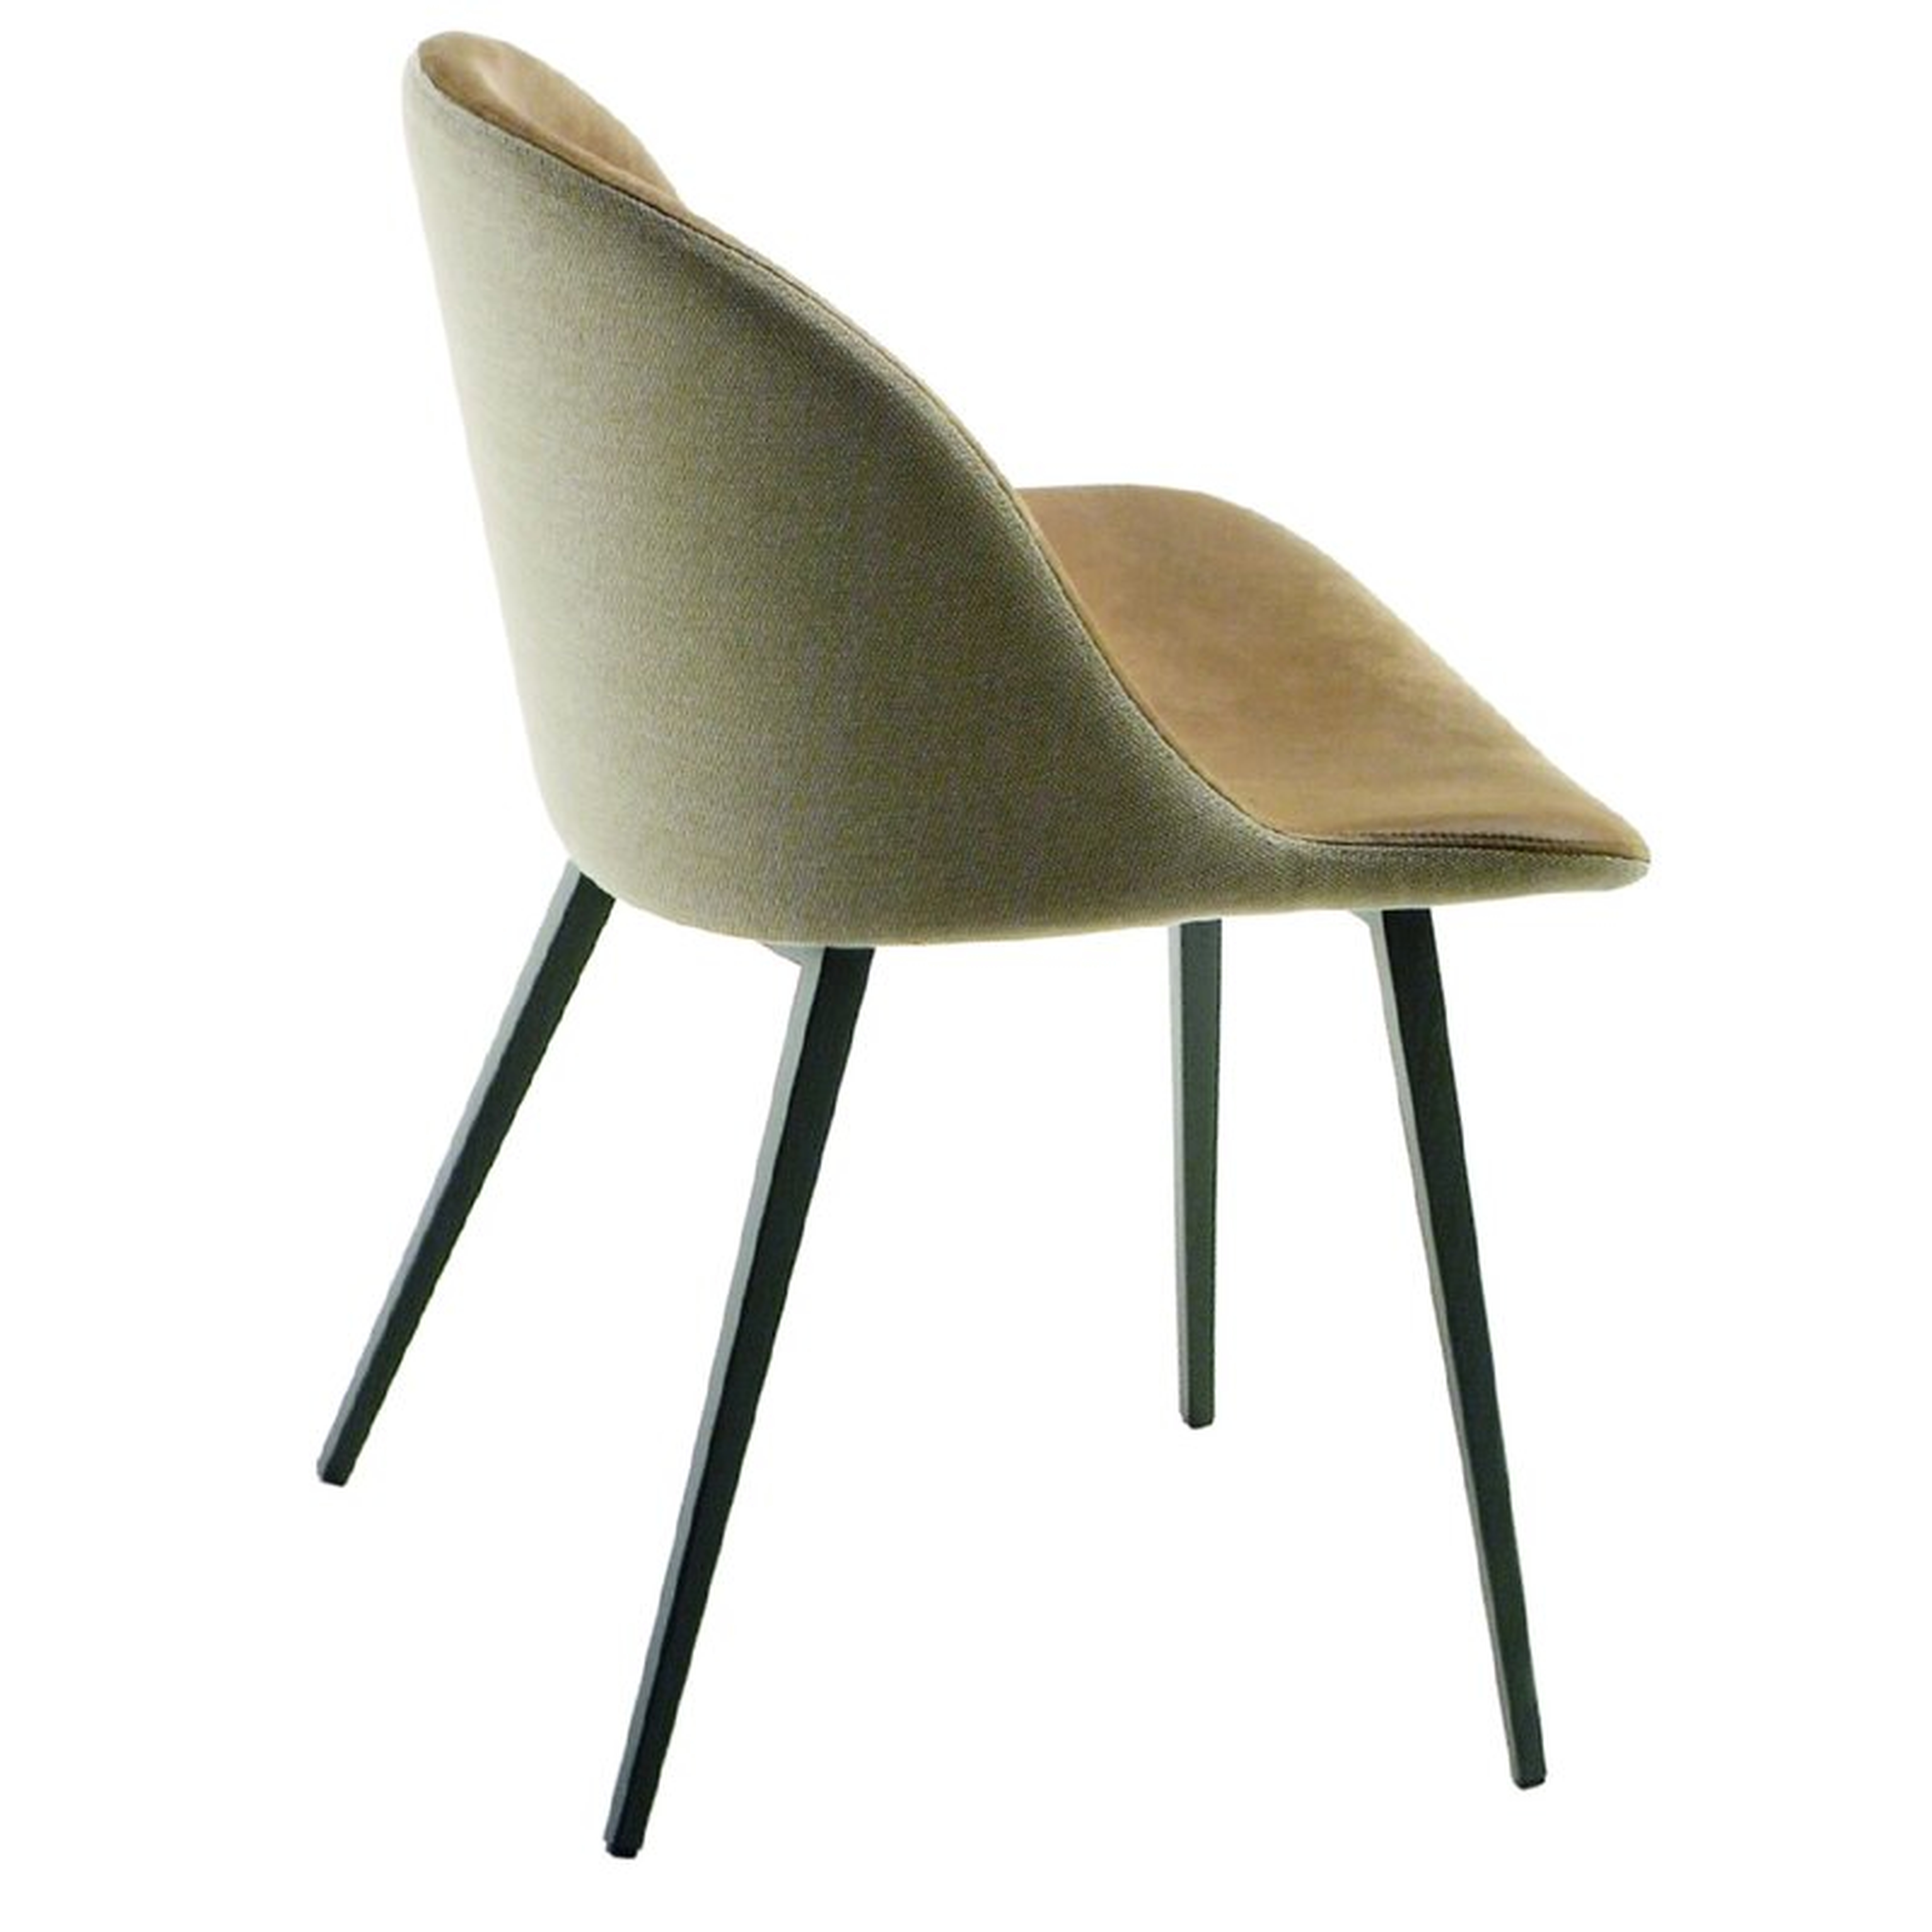 Midj Sonny S Q Upholstered Dining Chair Upholstery Color: Fenix Wool Fabric Olive Green, Finish: White Steel - Perigold